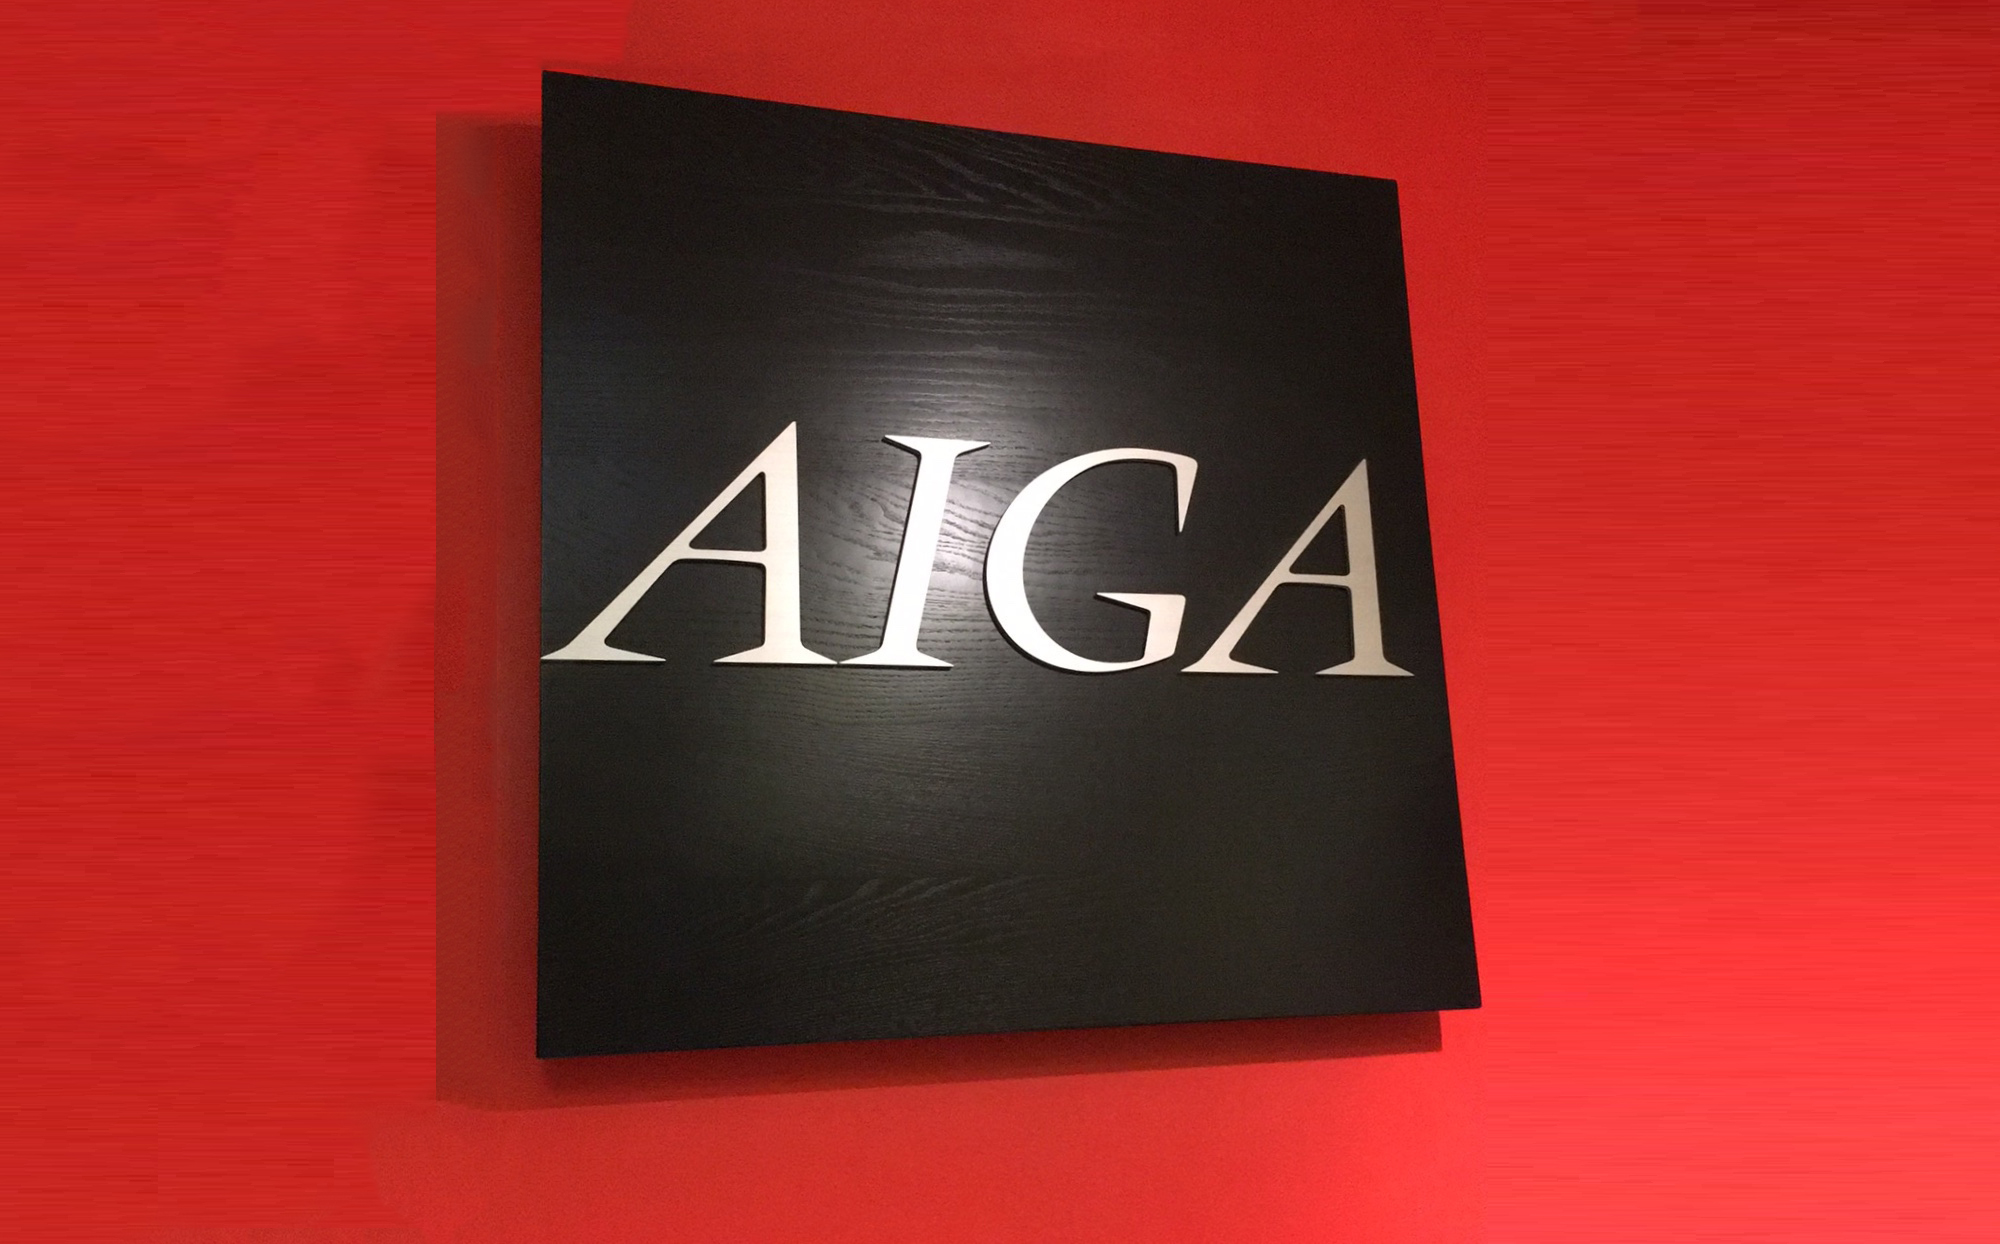 Happy to be named to the board of AIGA Minnesota